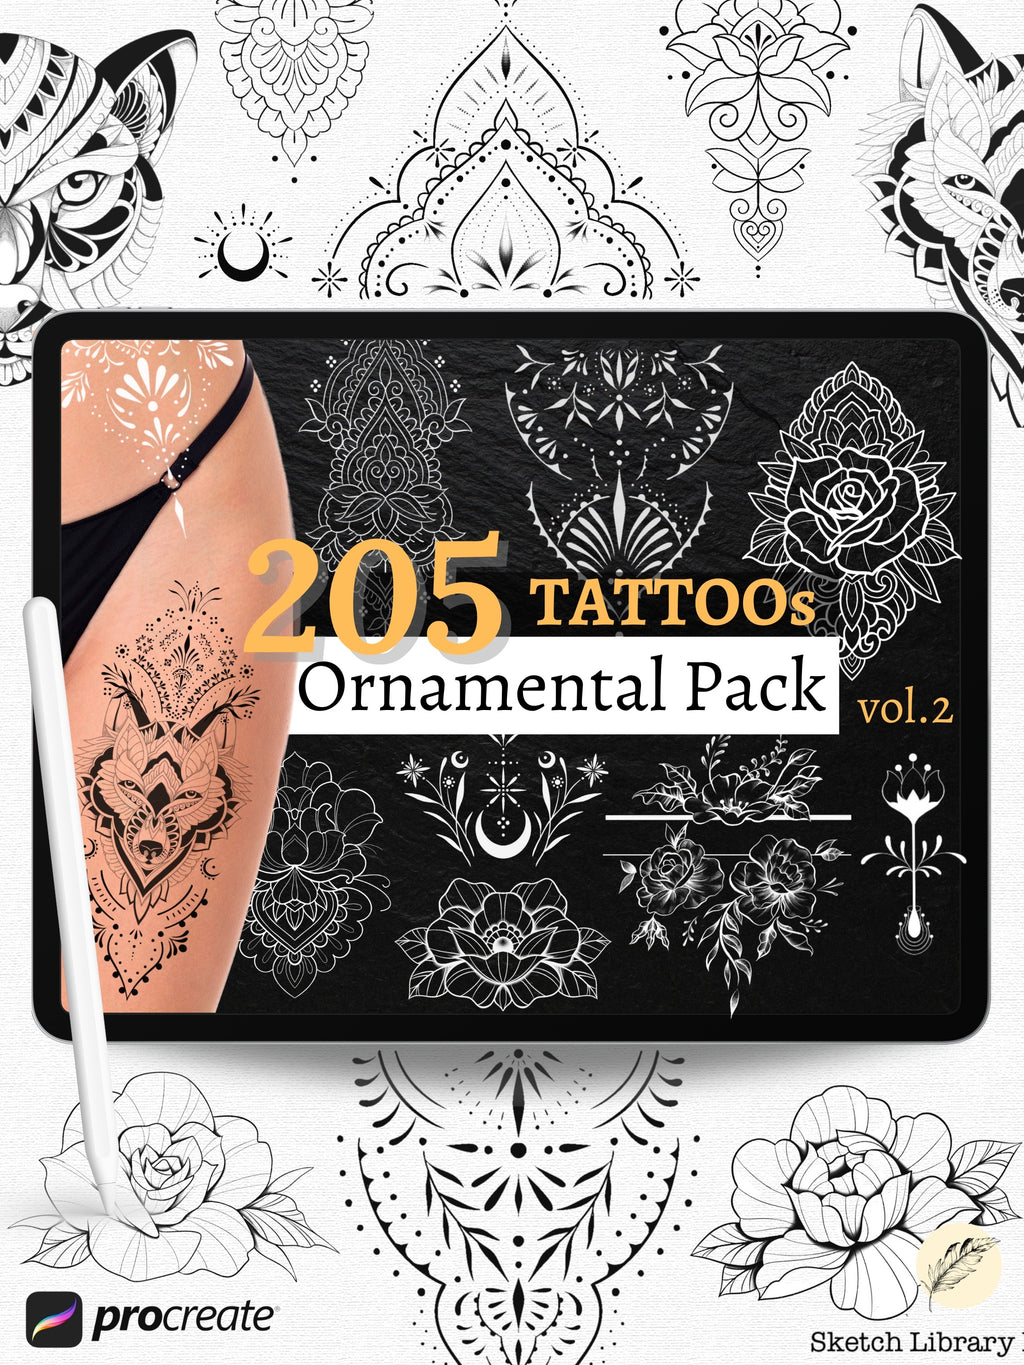 205 Ornaments brushes for procreate vol.2 // tattoo stamps, mandala, floral, rose, peony, animals